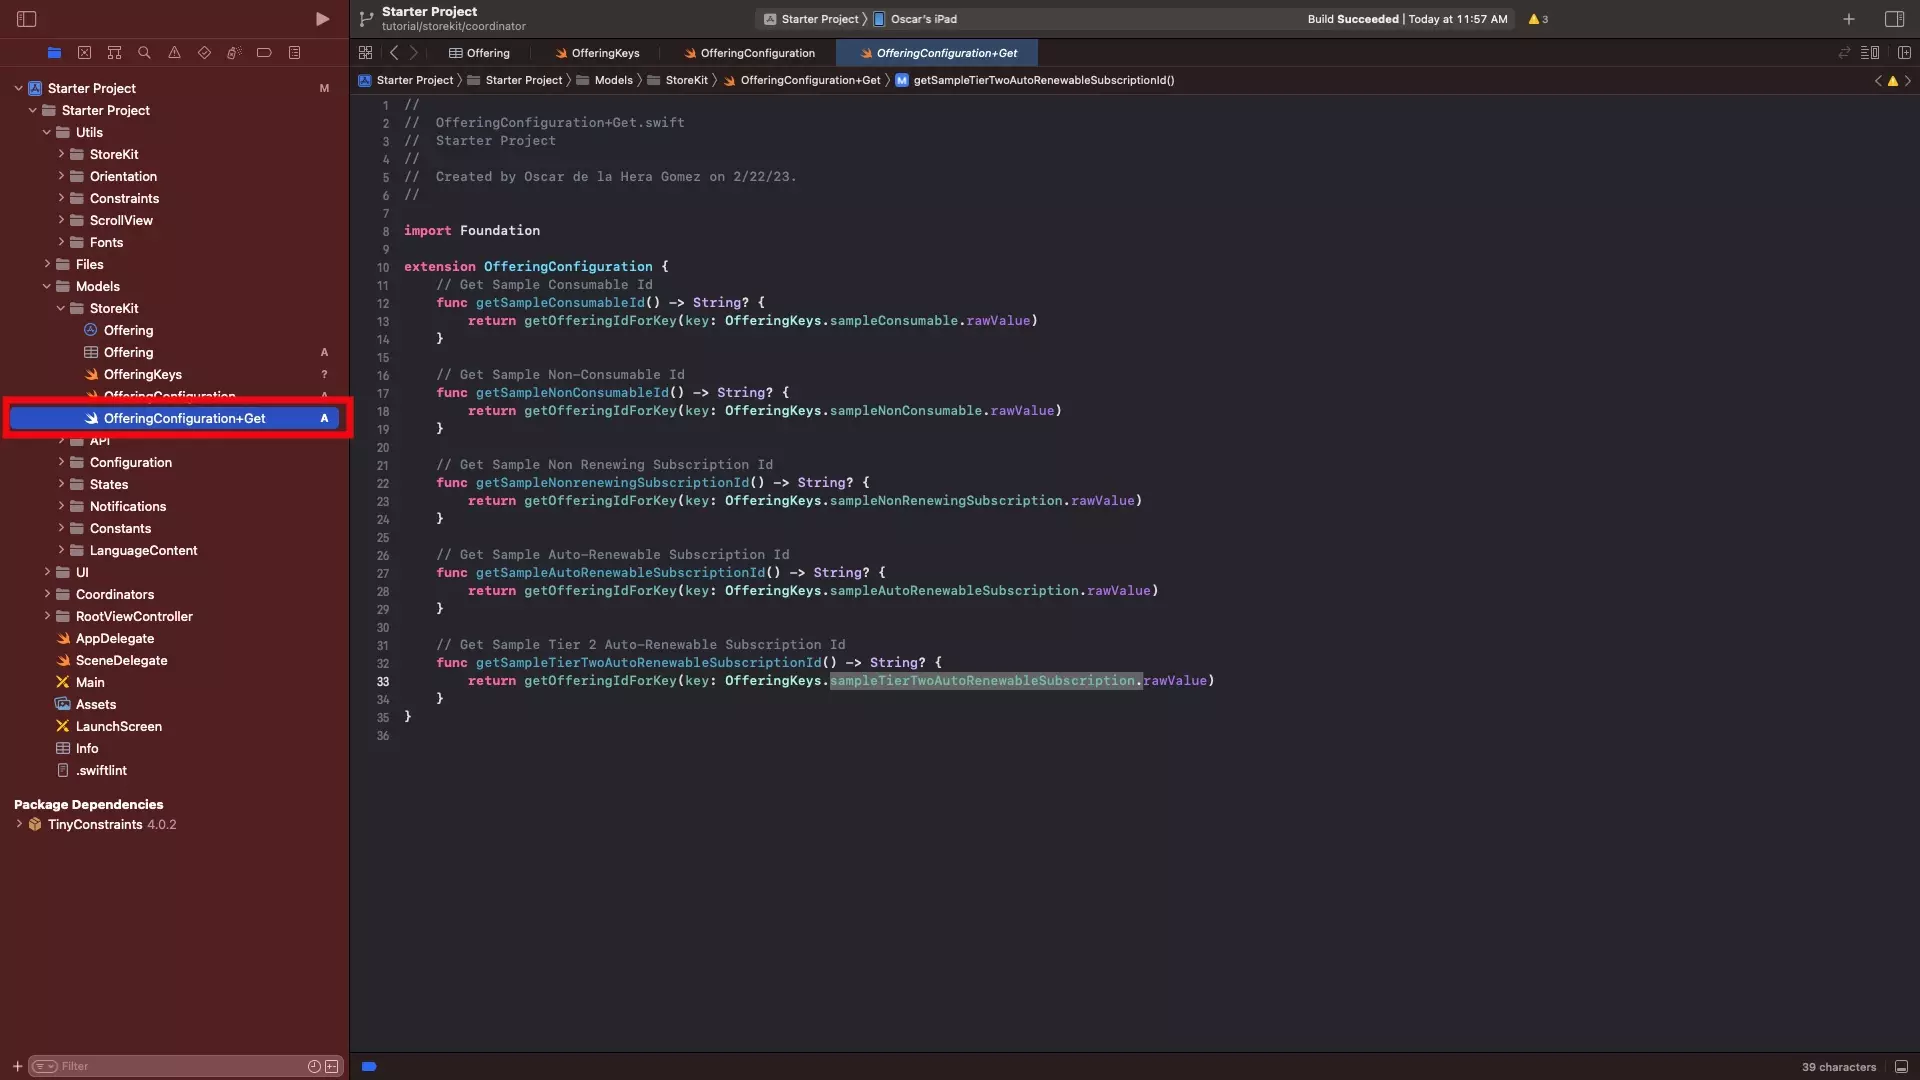 A screenshot of XCode with the OfferingConfiguration+Get.swift highlighted and selected, showing the code available below.